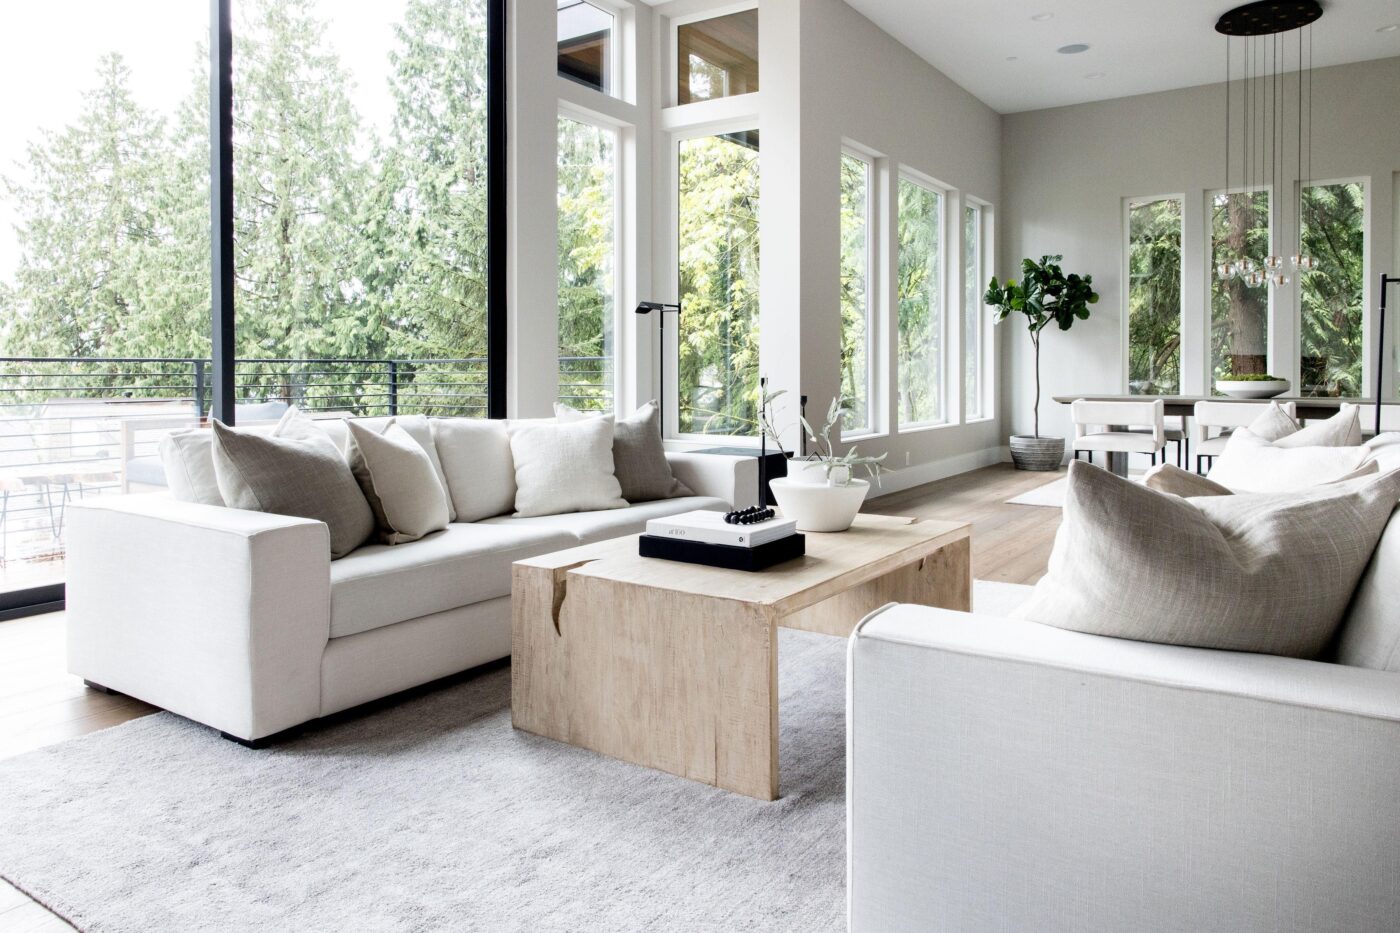 Urban Domain is a Boutique Home Staging and Interior Design Firm providing exceptional design services to Seattle’s Eastside, Seattle, Bellevue, Sammamish, Medina, Kirkland, Tacoma (2)